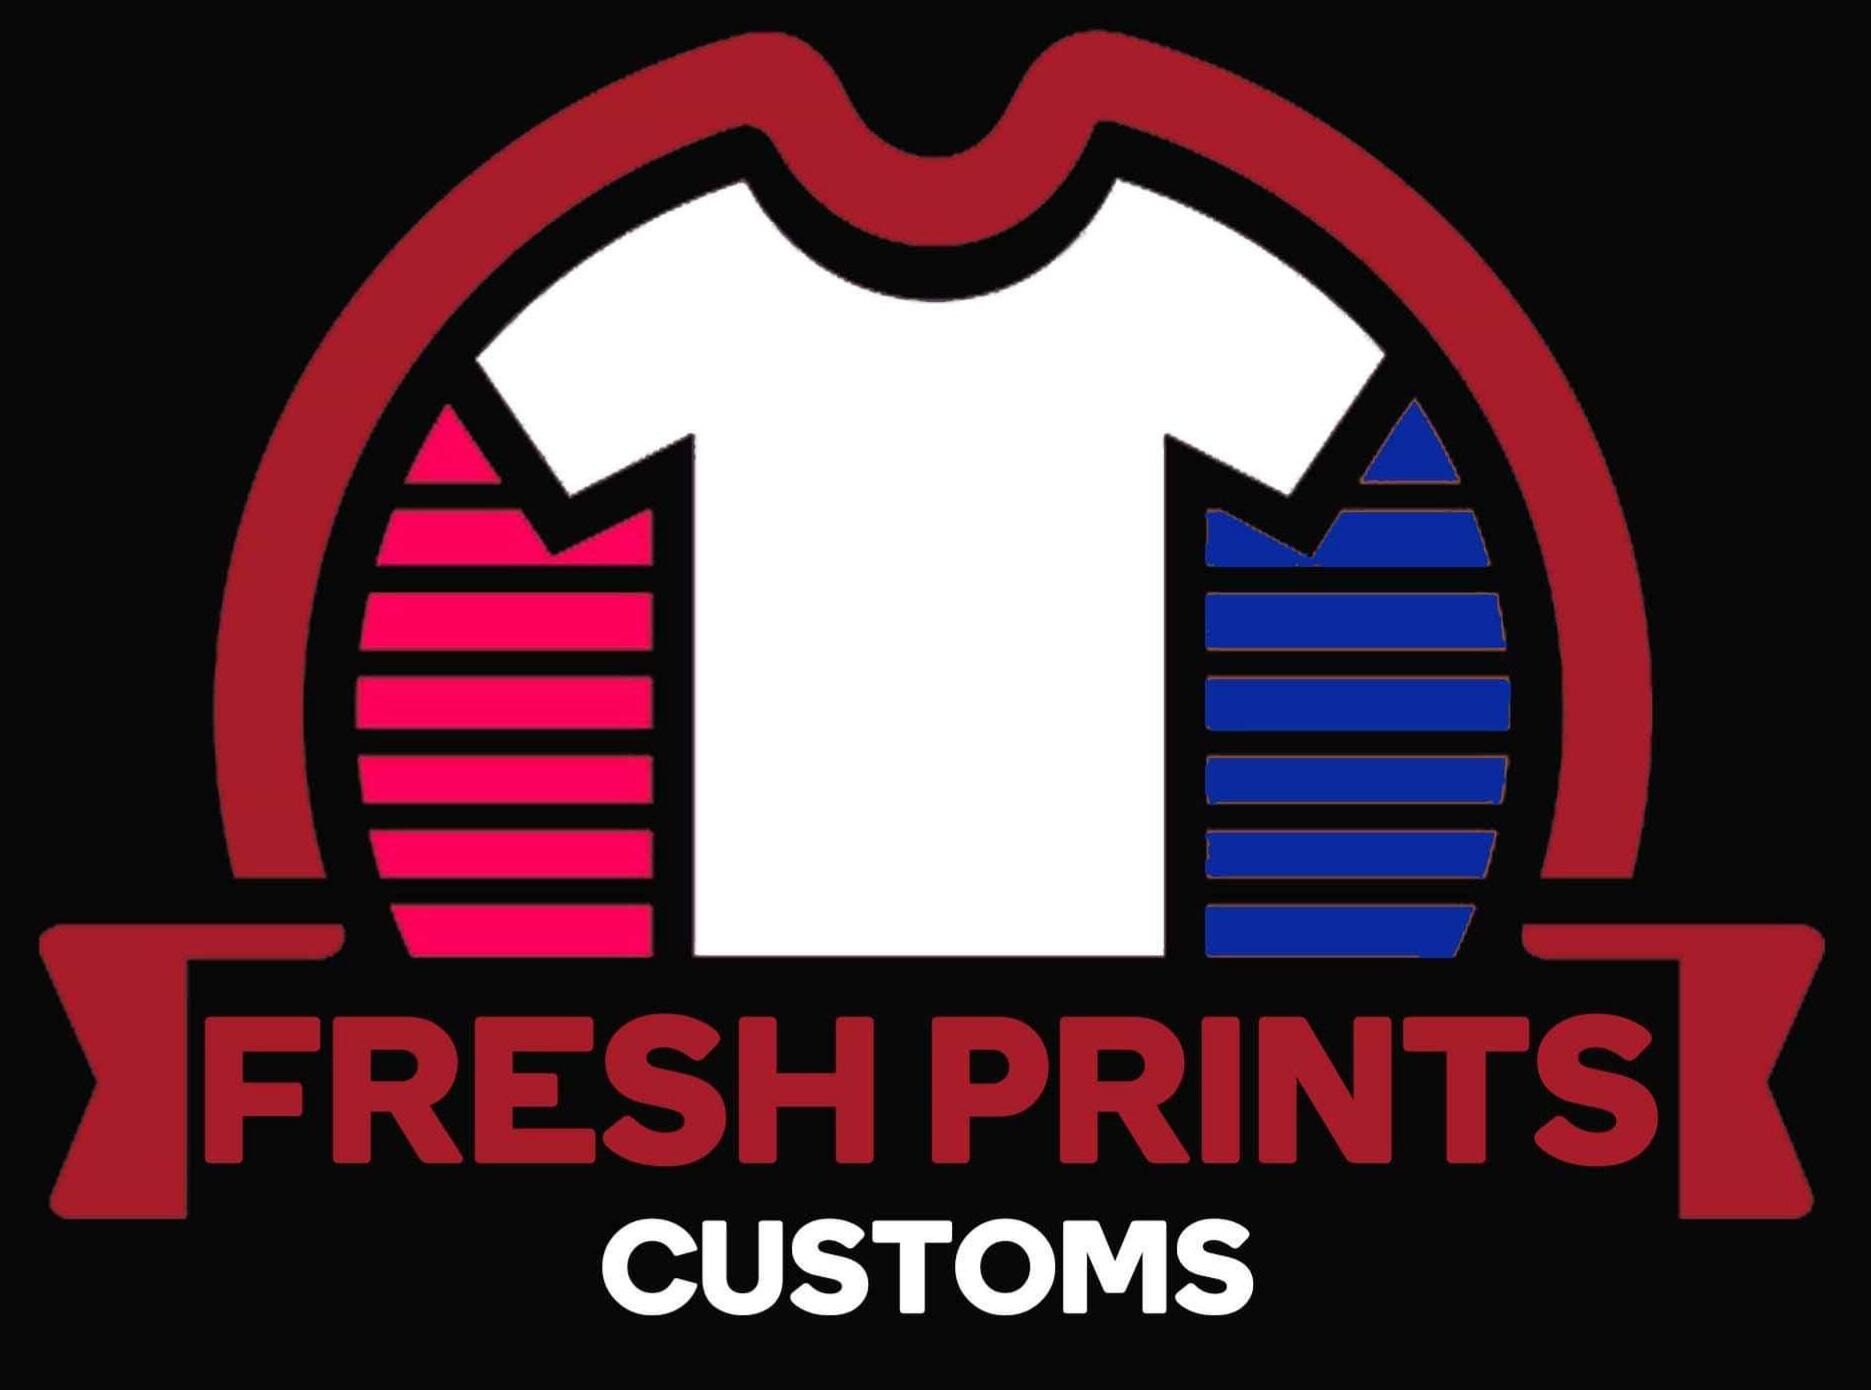 Clean and fresh! #customlabels #customlabelprinting #visualmerchandising  #retailsolutions #label